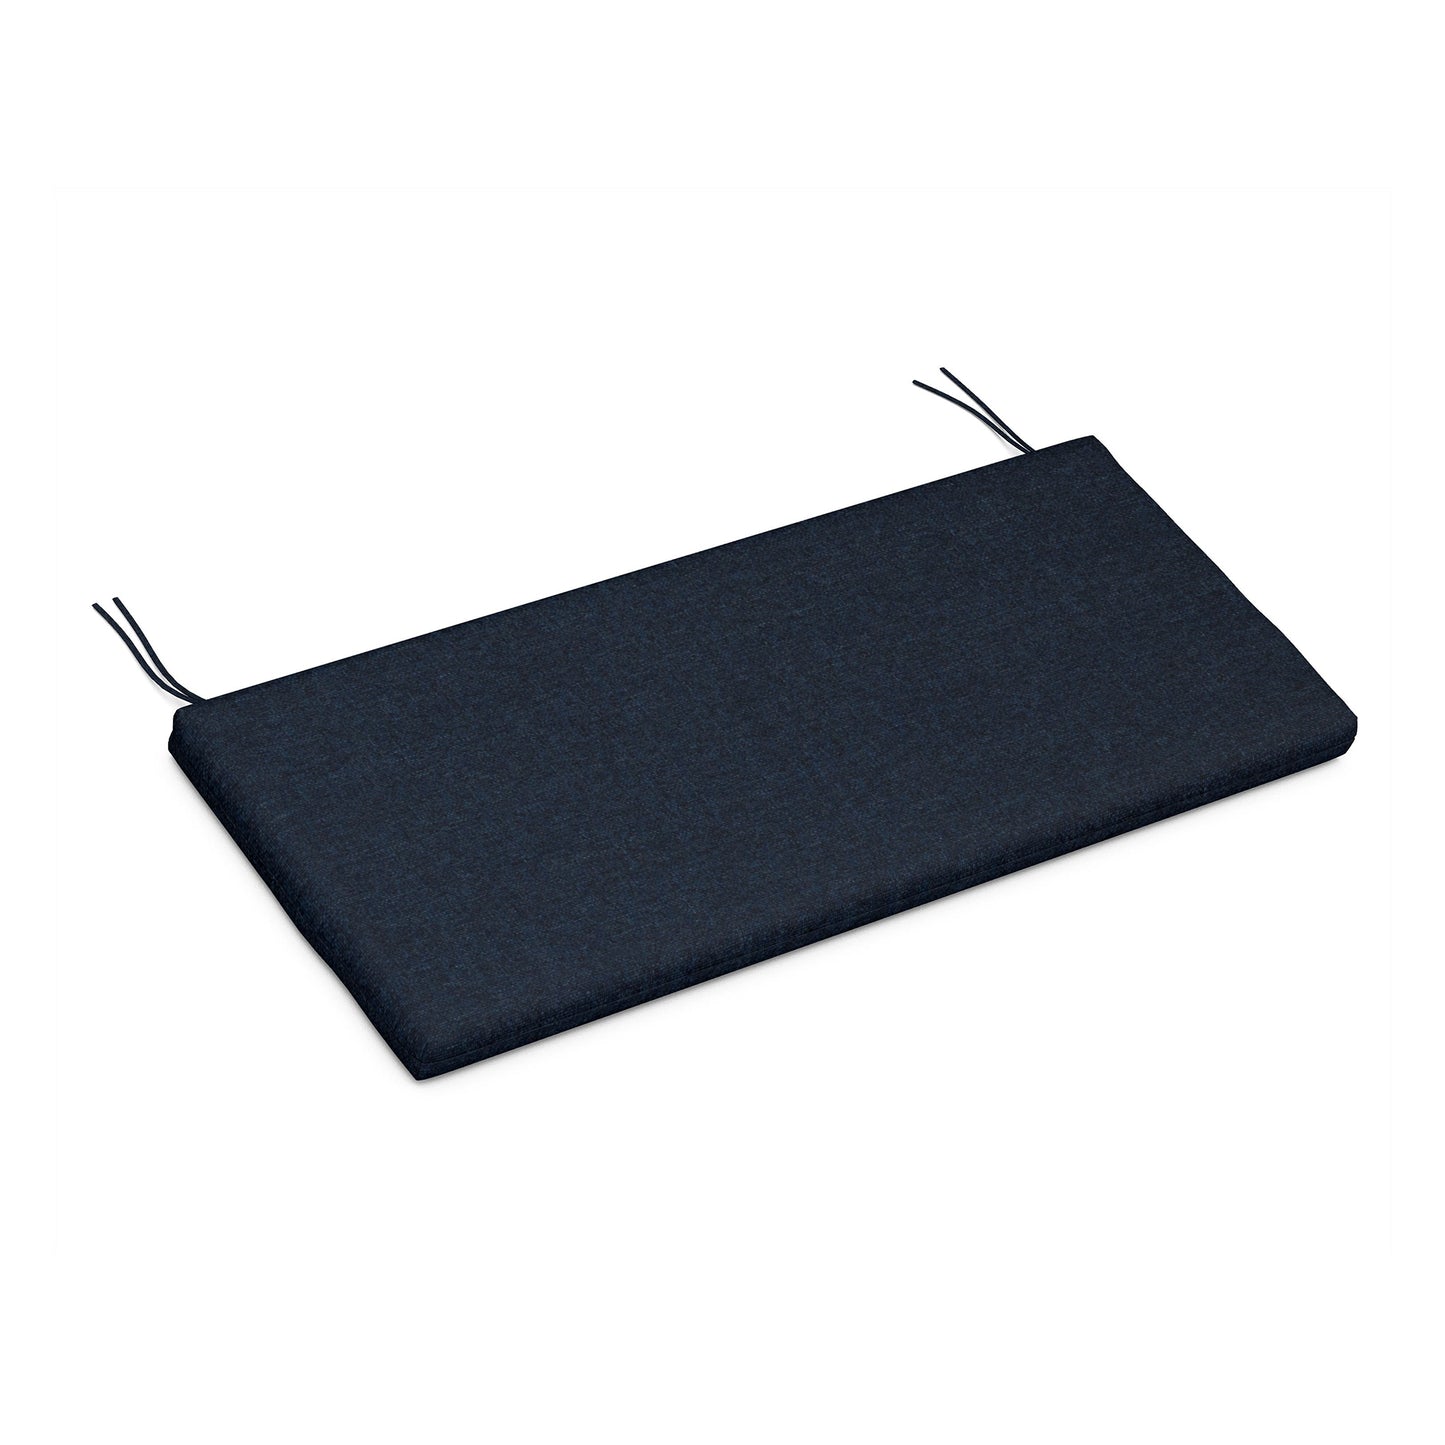 Dark blue POLYWOOD® XPWS0060 seat cushion with tie backs, isolated on a white background.